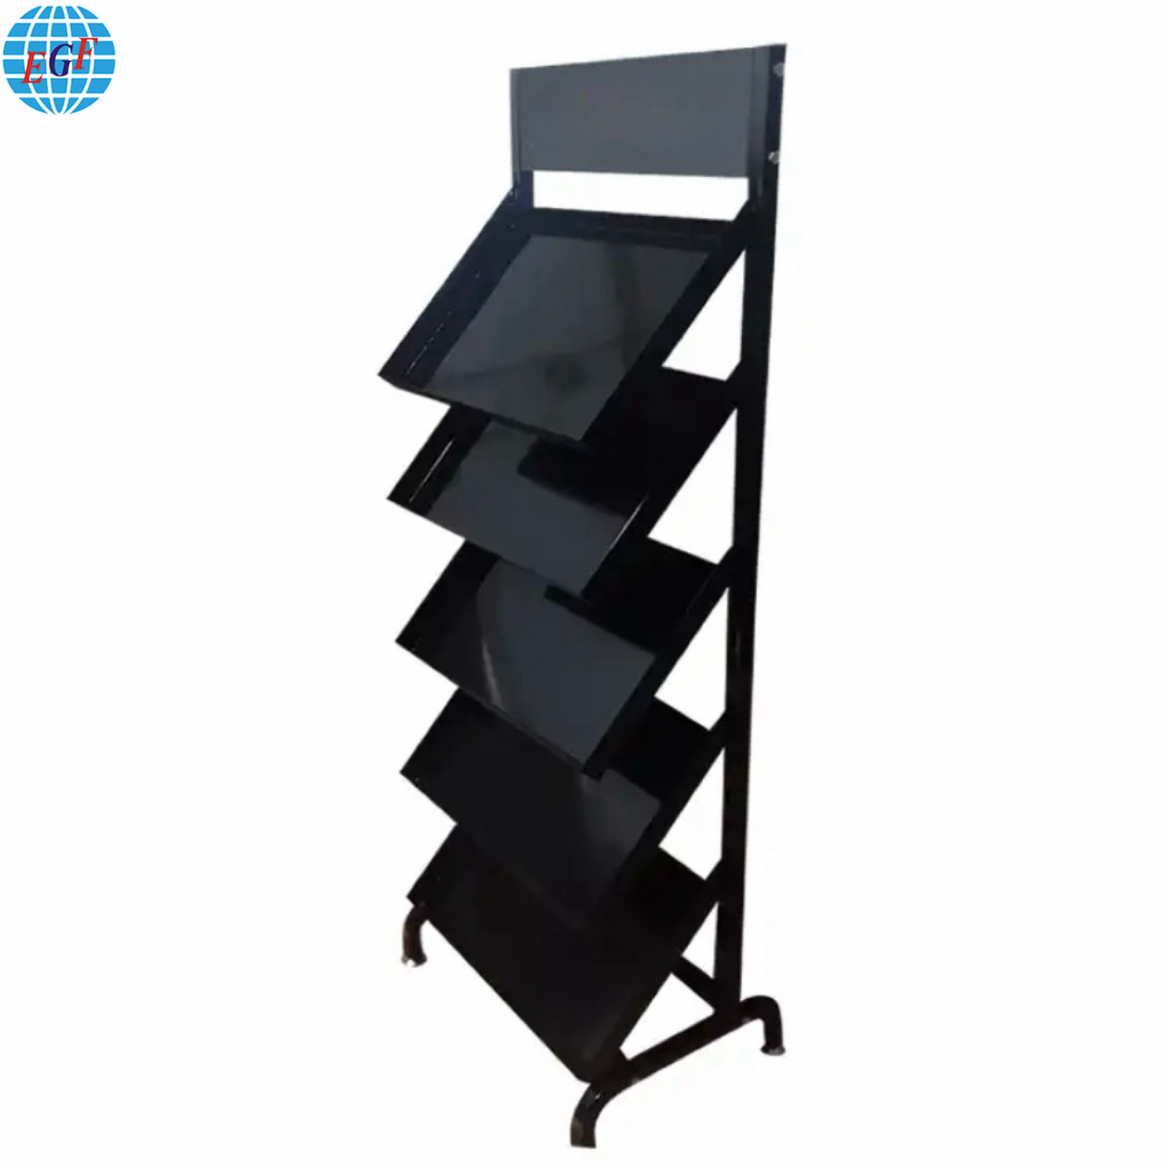 Custom Ceramic Tile Marble Display Stand Made of Black Metal Material with Brochure Display Stand